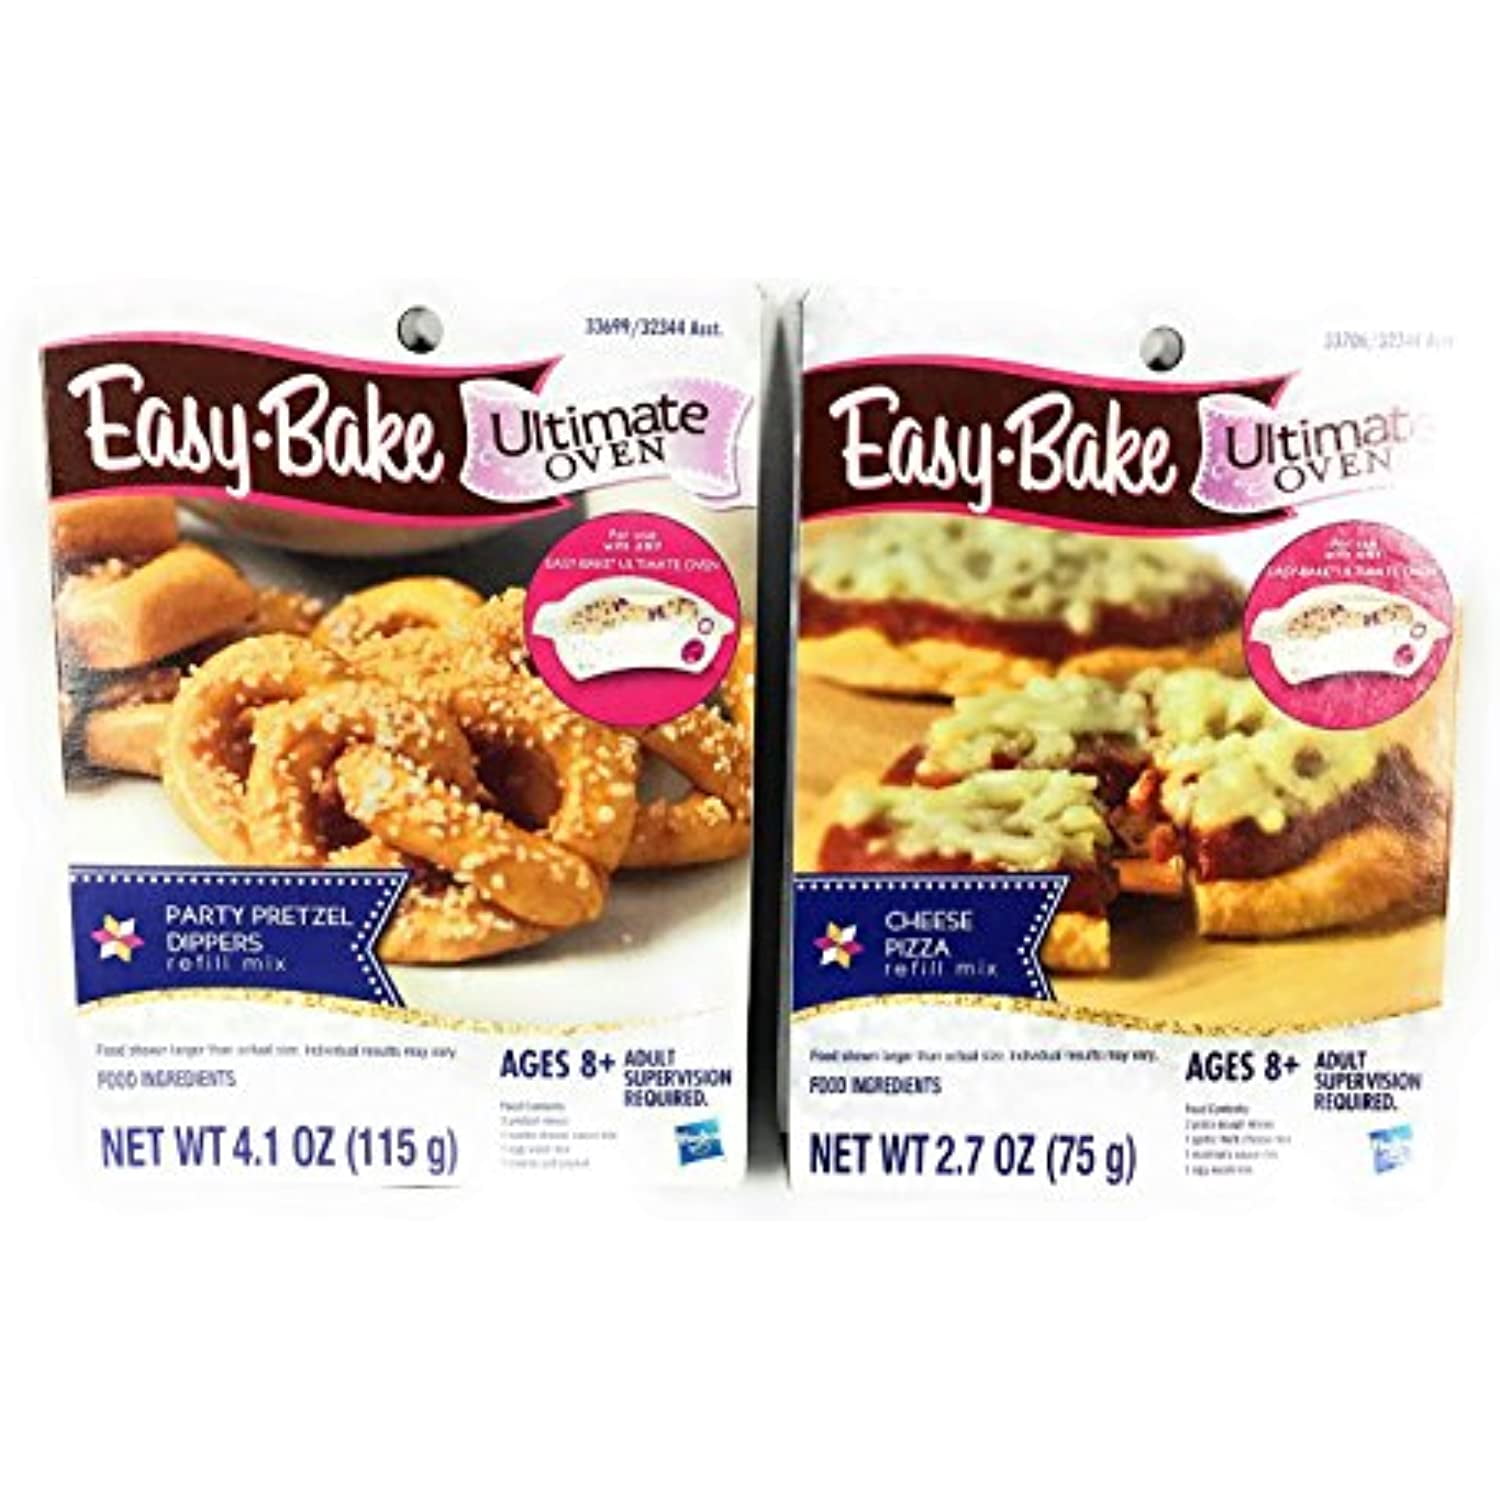 Ultimate Easy Bake Oven Party Pretzel Dippsers and Cheese Pizza Refill ...